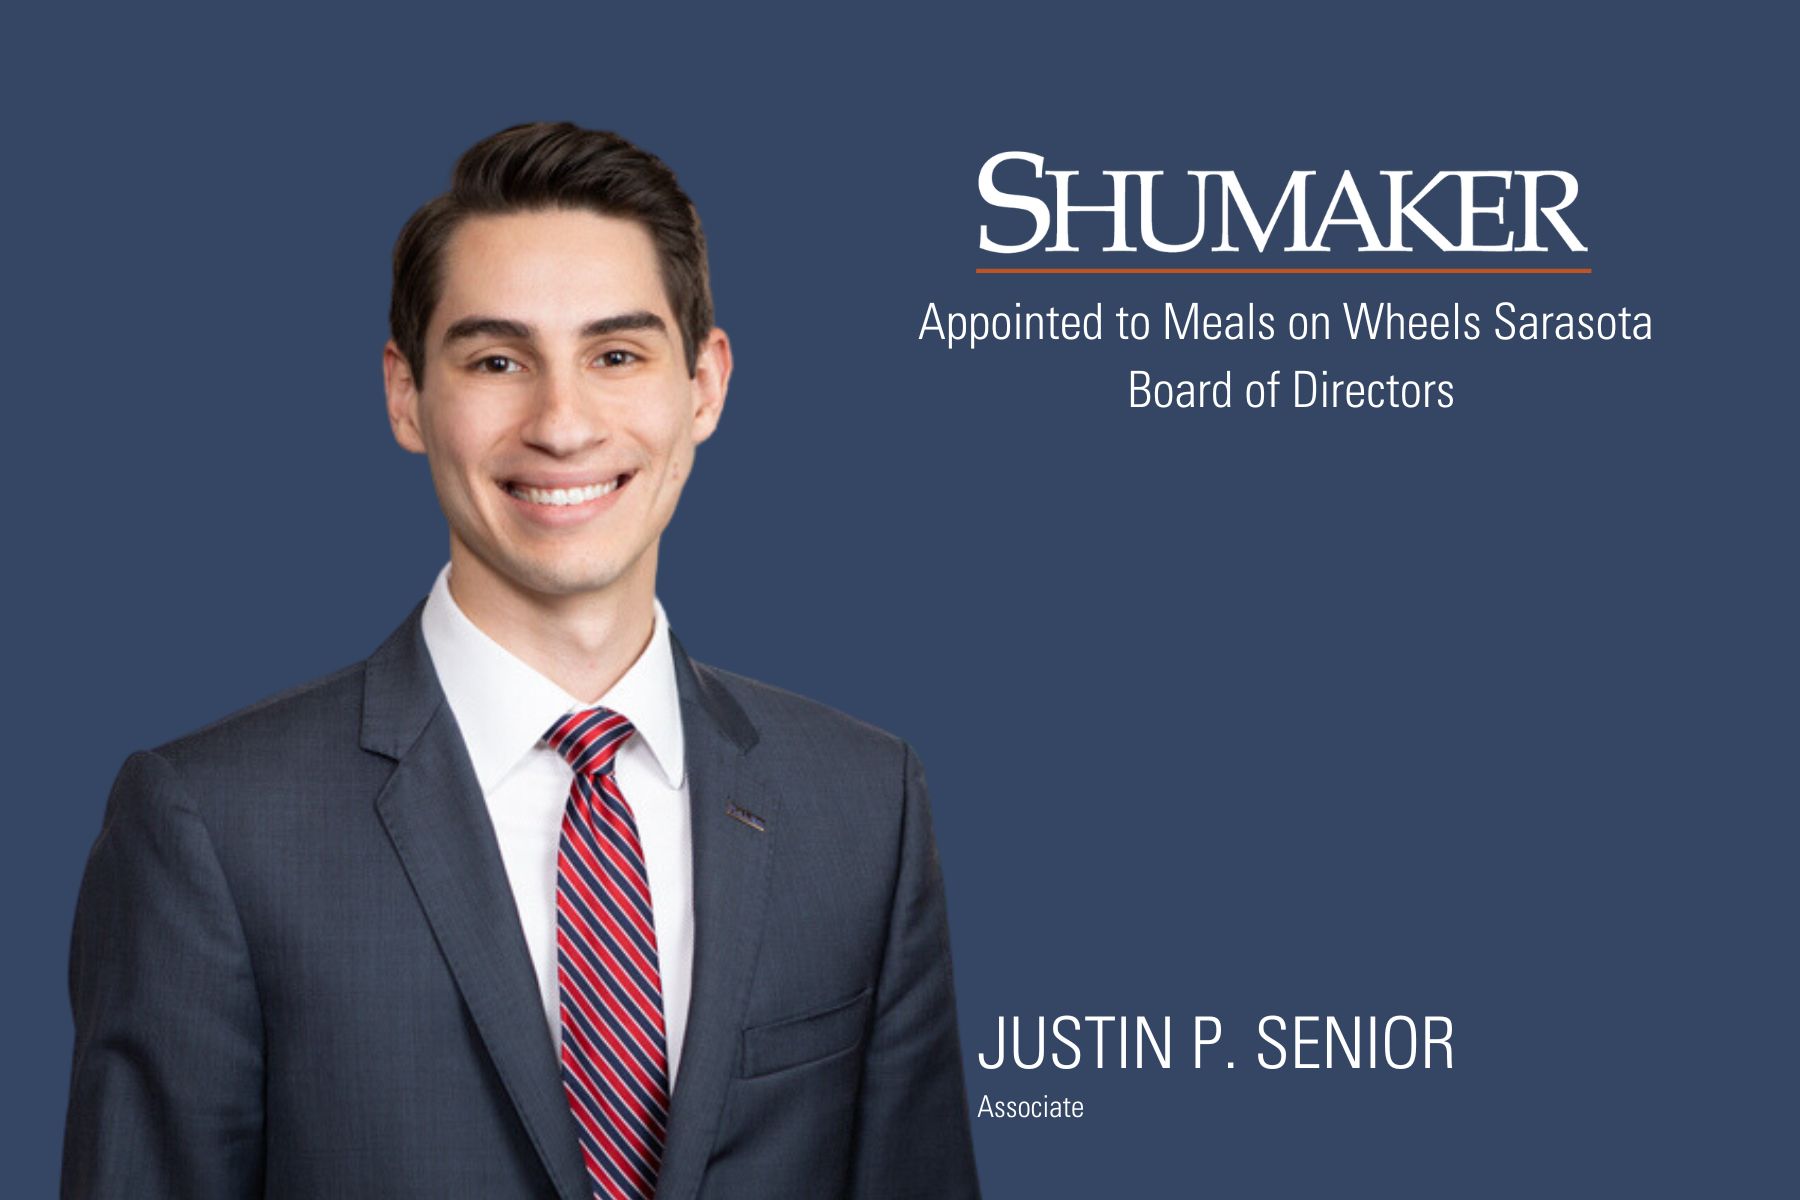 Justin P. Senior Appointed to Meals on Wheels Sarasota Board of Directors